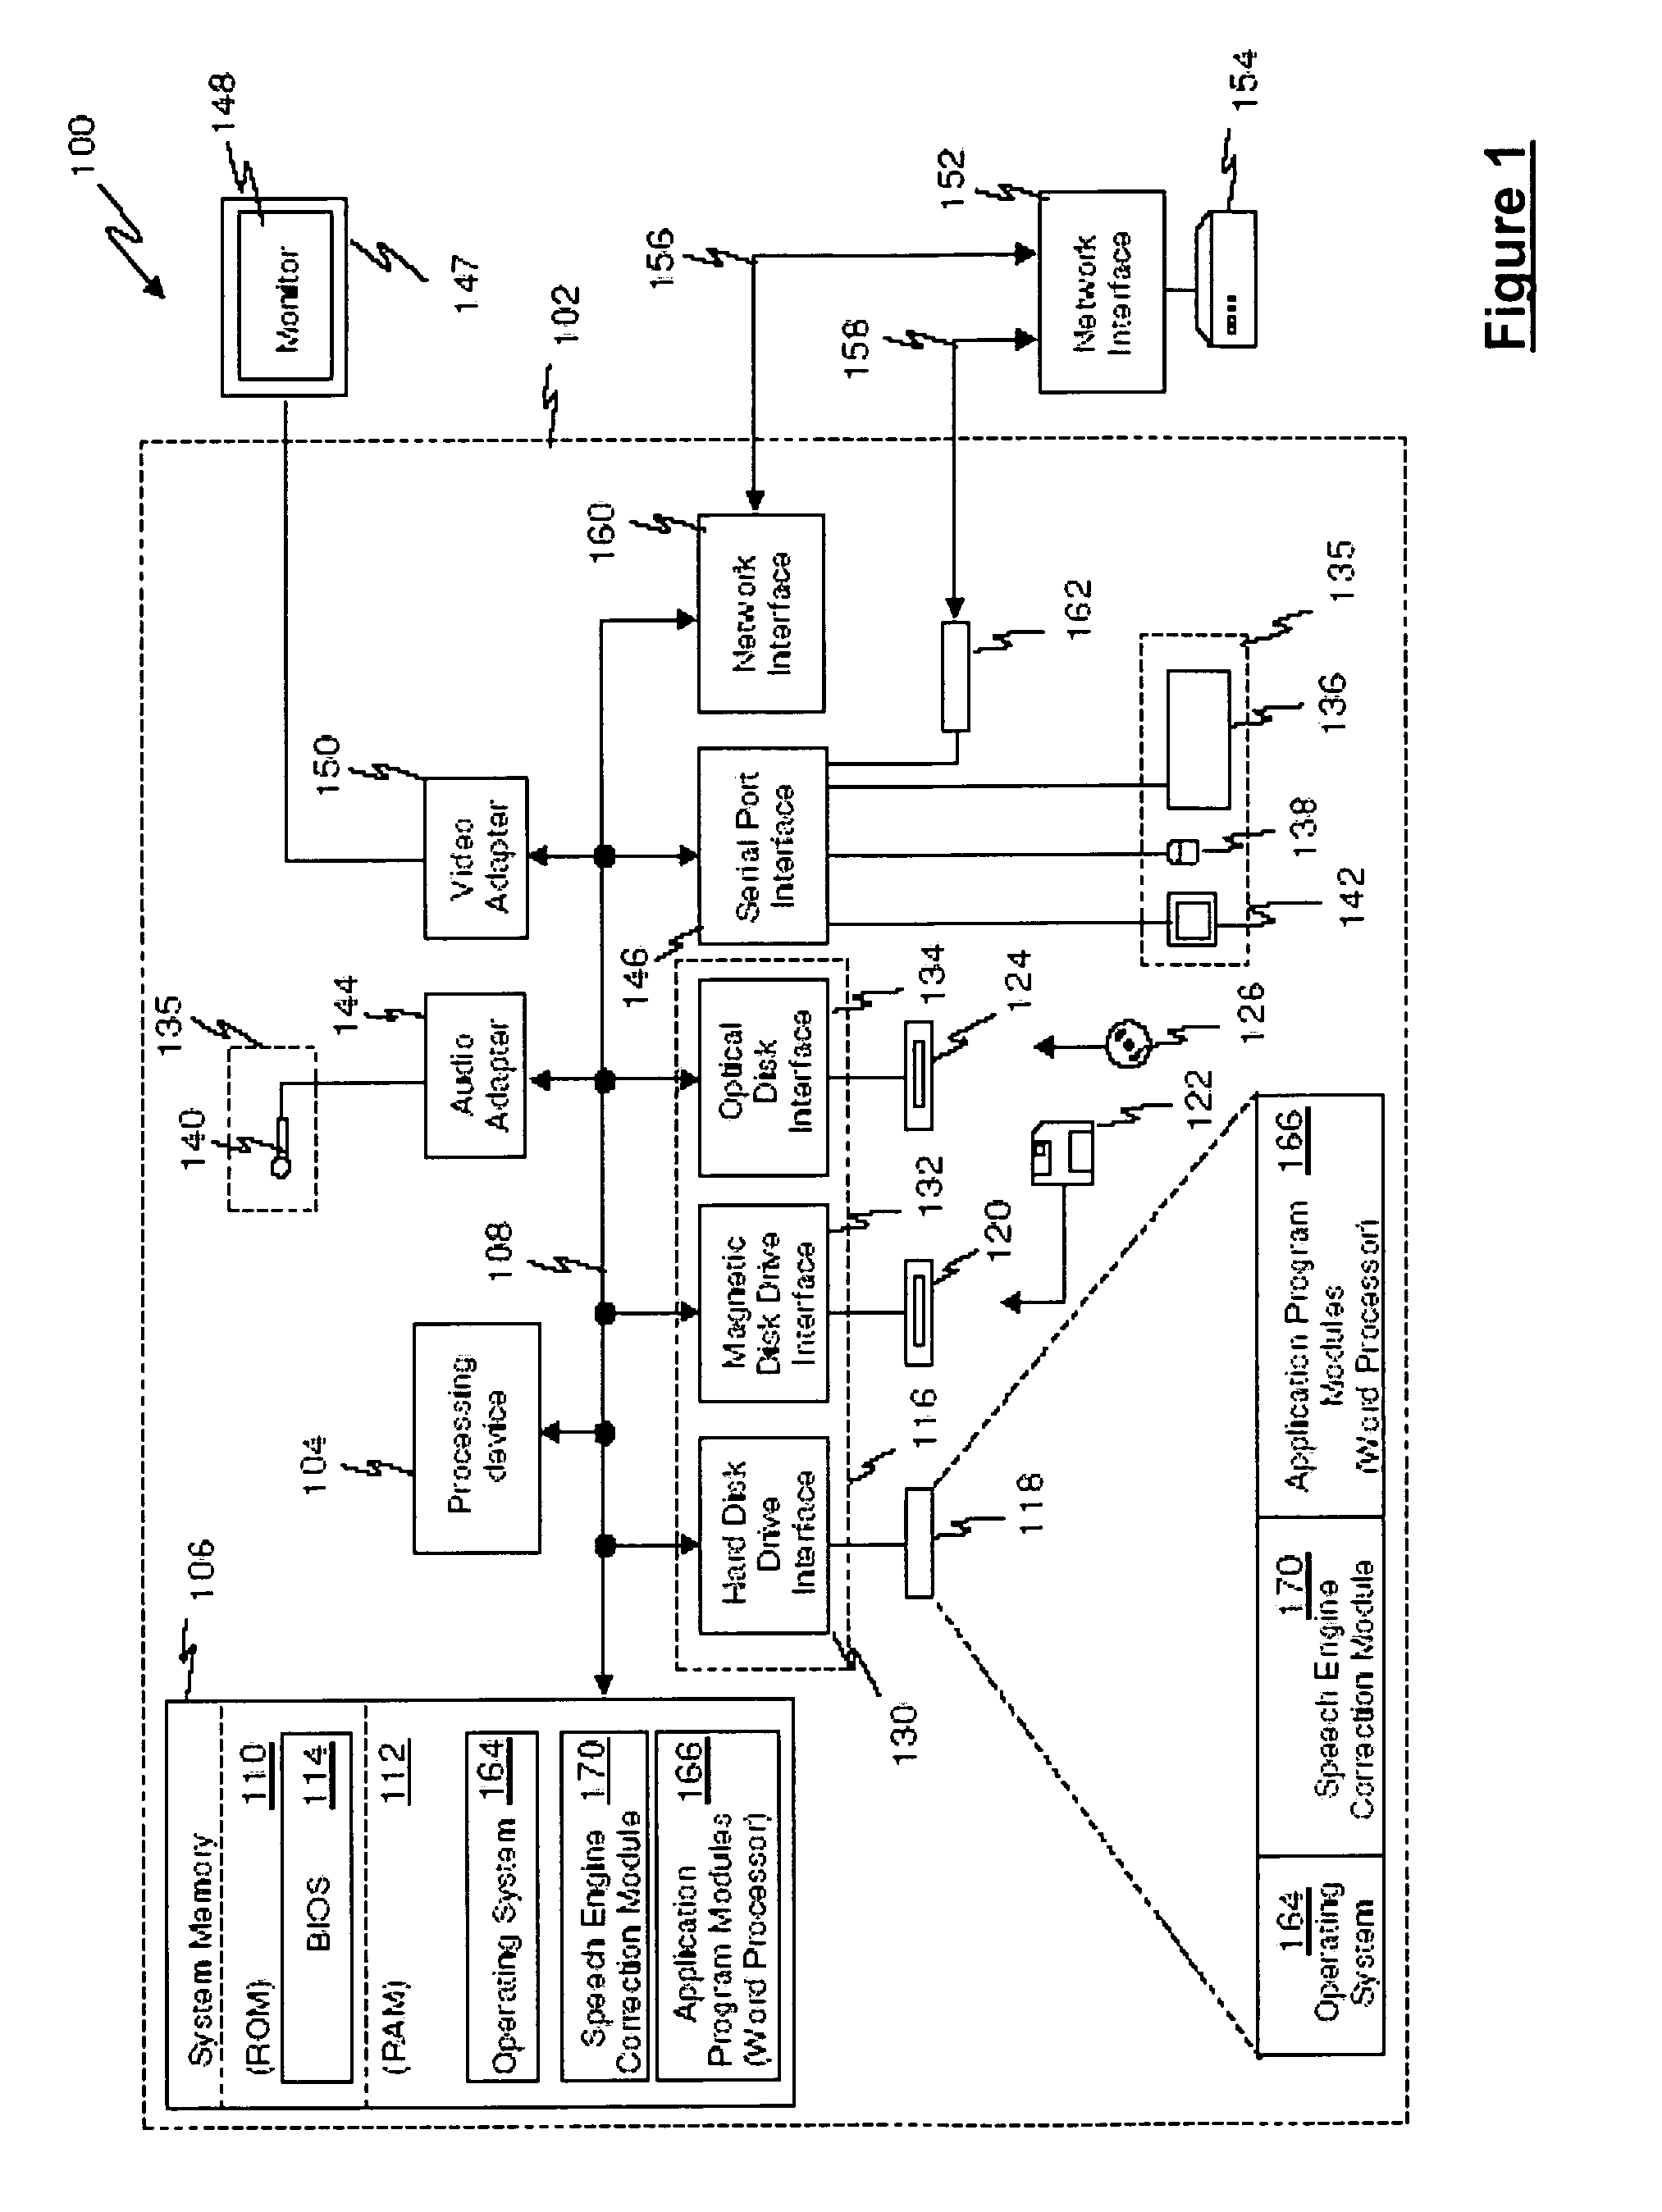 Method for servicing a vehicle